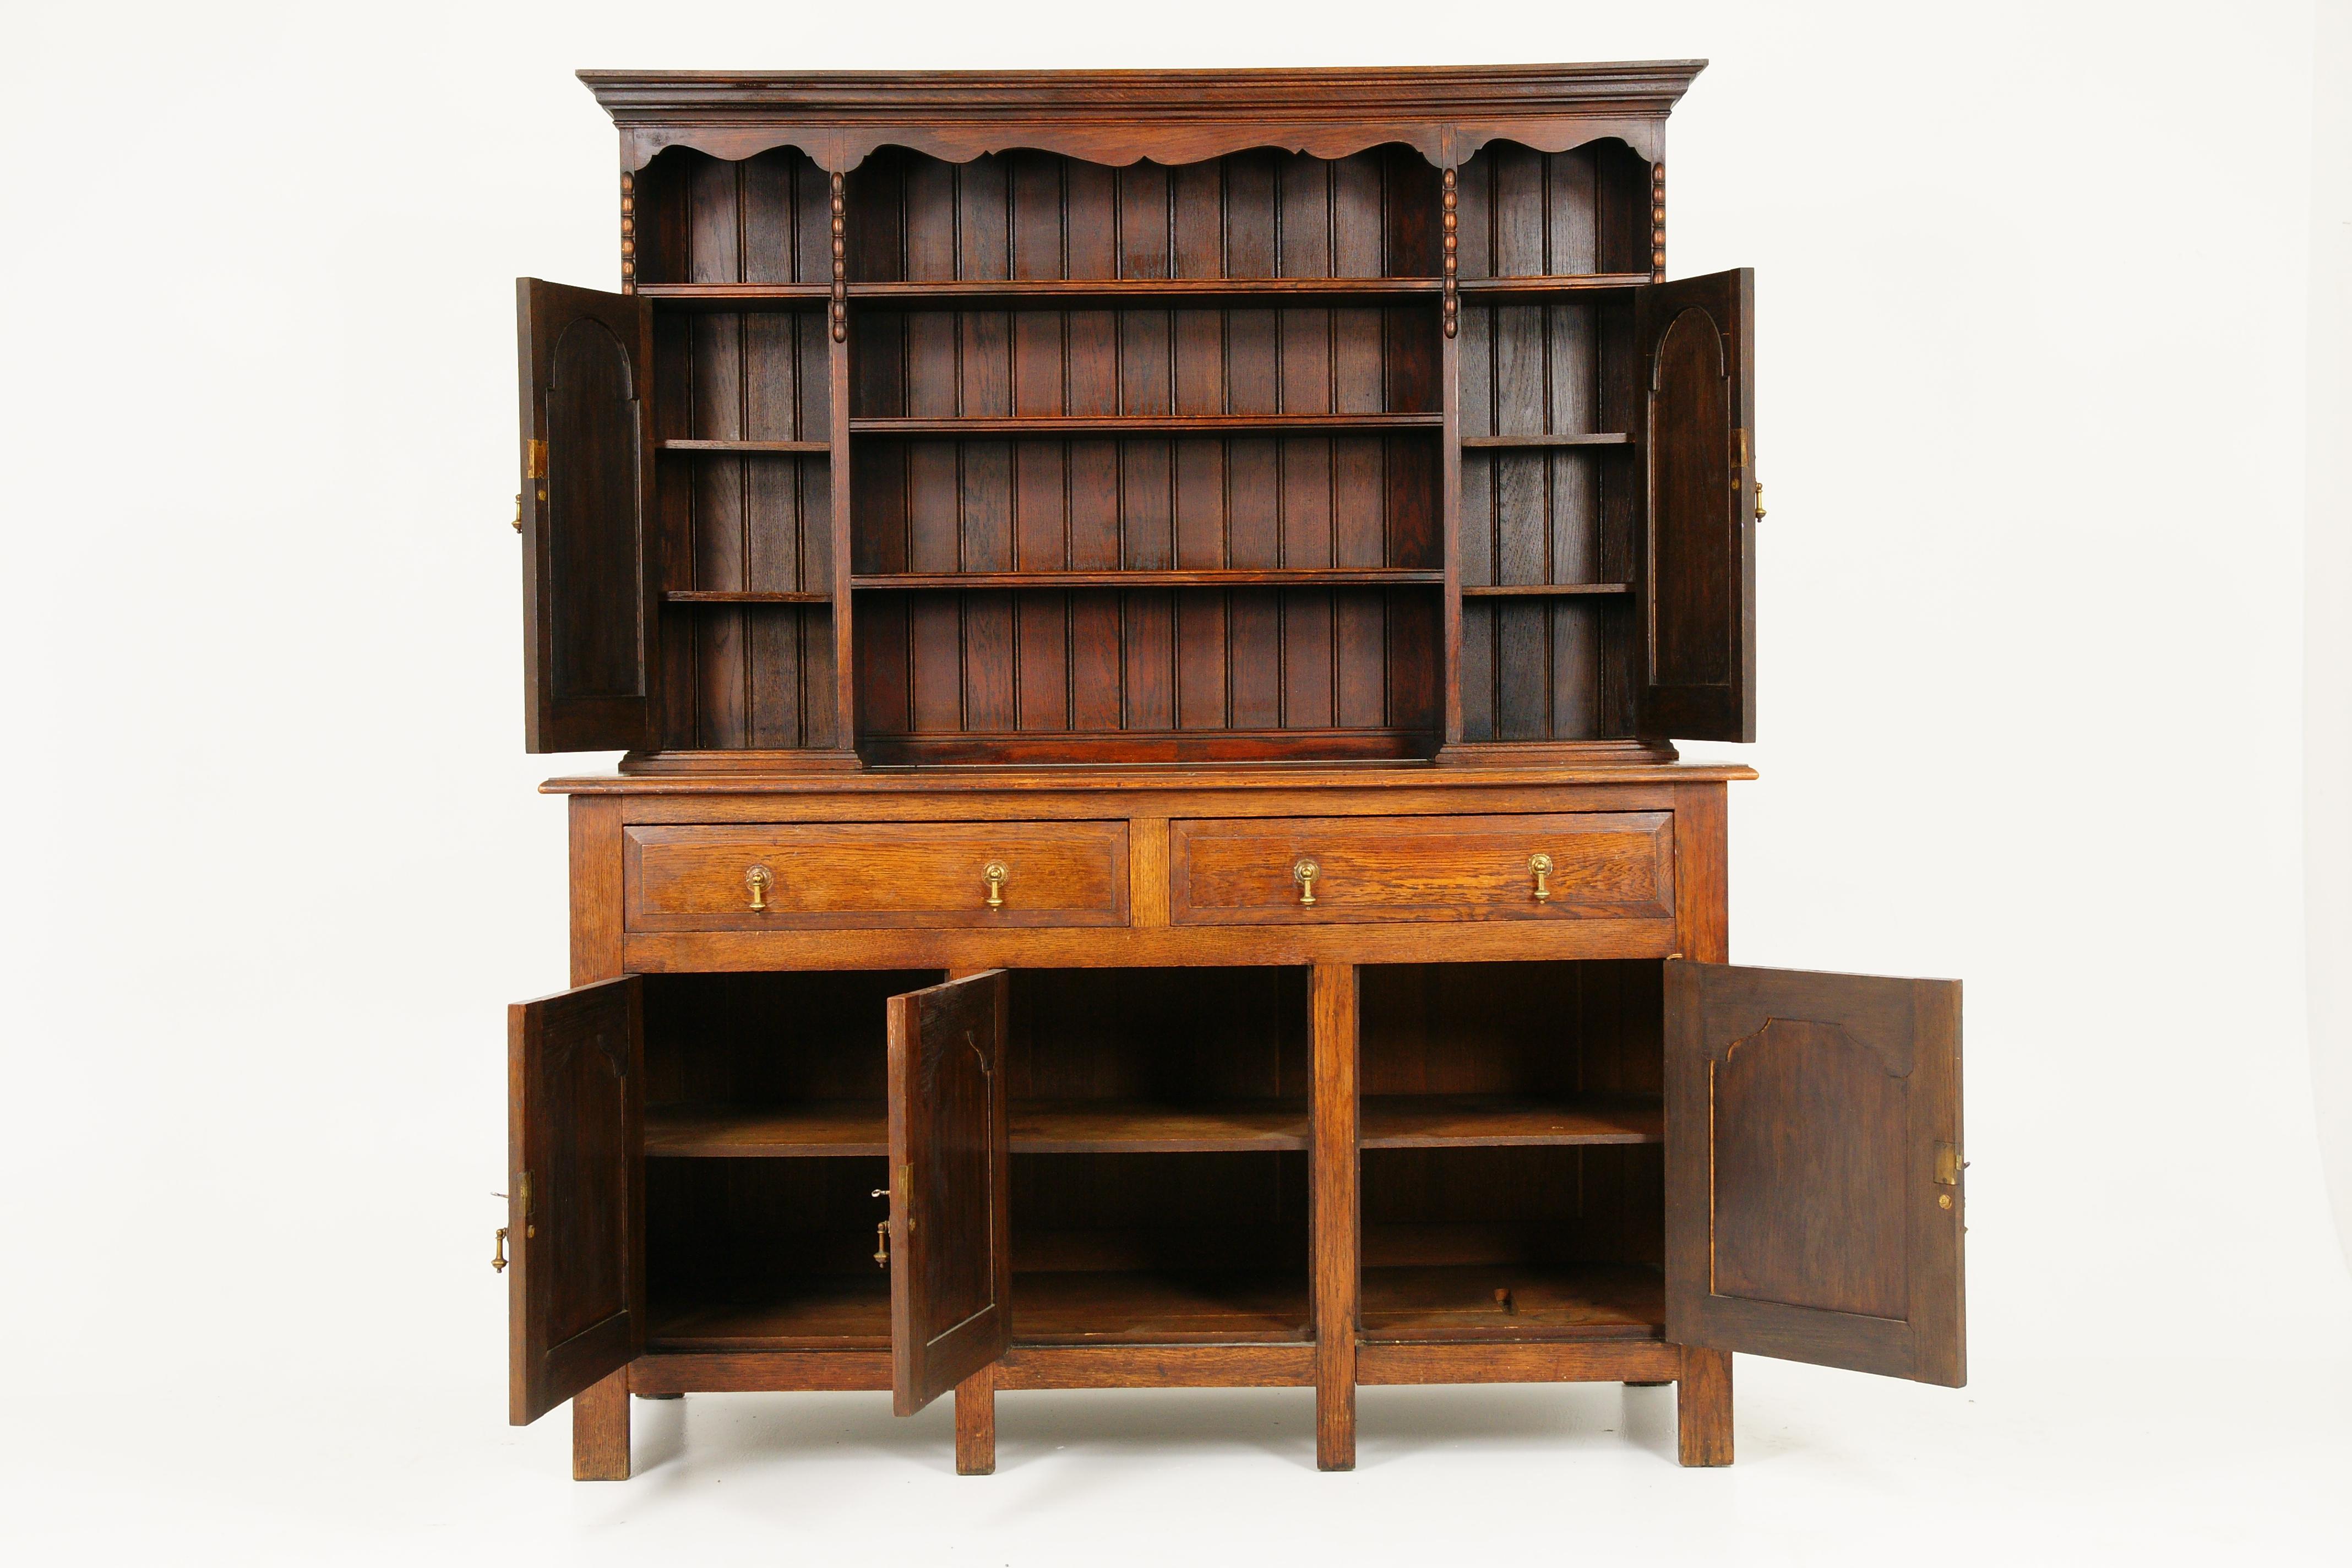 Antique welsh dresser, plate rack oak, Scotland 1920, antique furniture 1643

Scotland, 1920
Solid oak with oak finished shirted cornice above
Three shelves below
Flanked by a pair of panelled doors
All original hardware open to reveal a pair